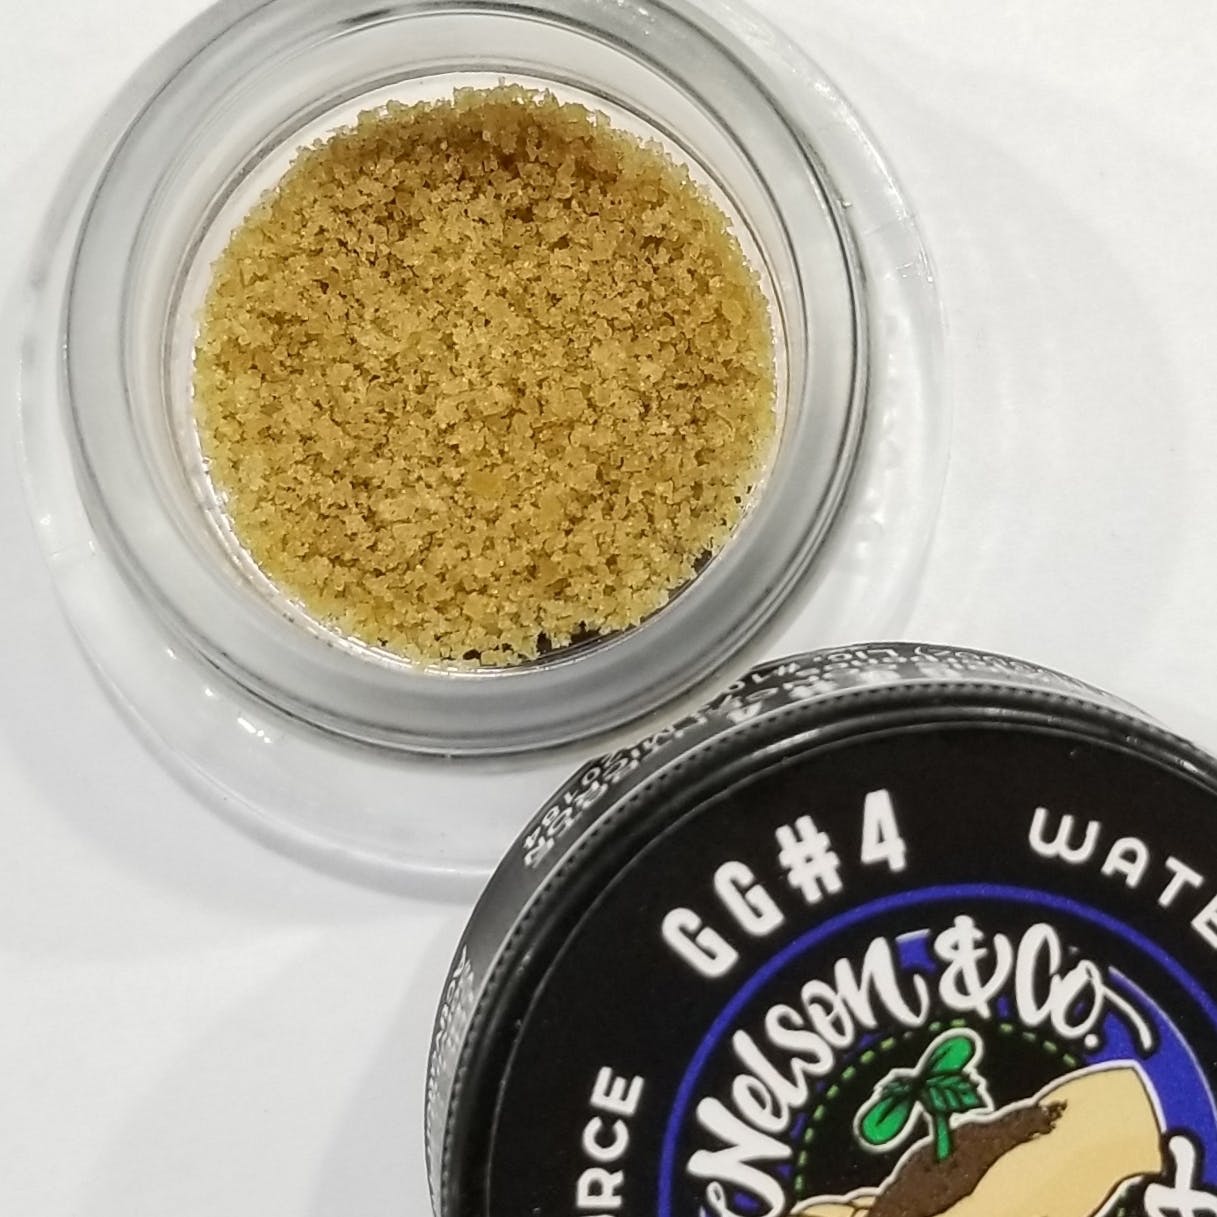 GG#4 Water Hash- Nelson and Co